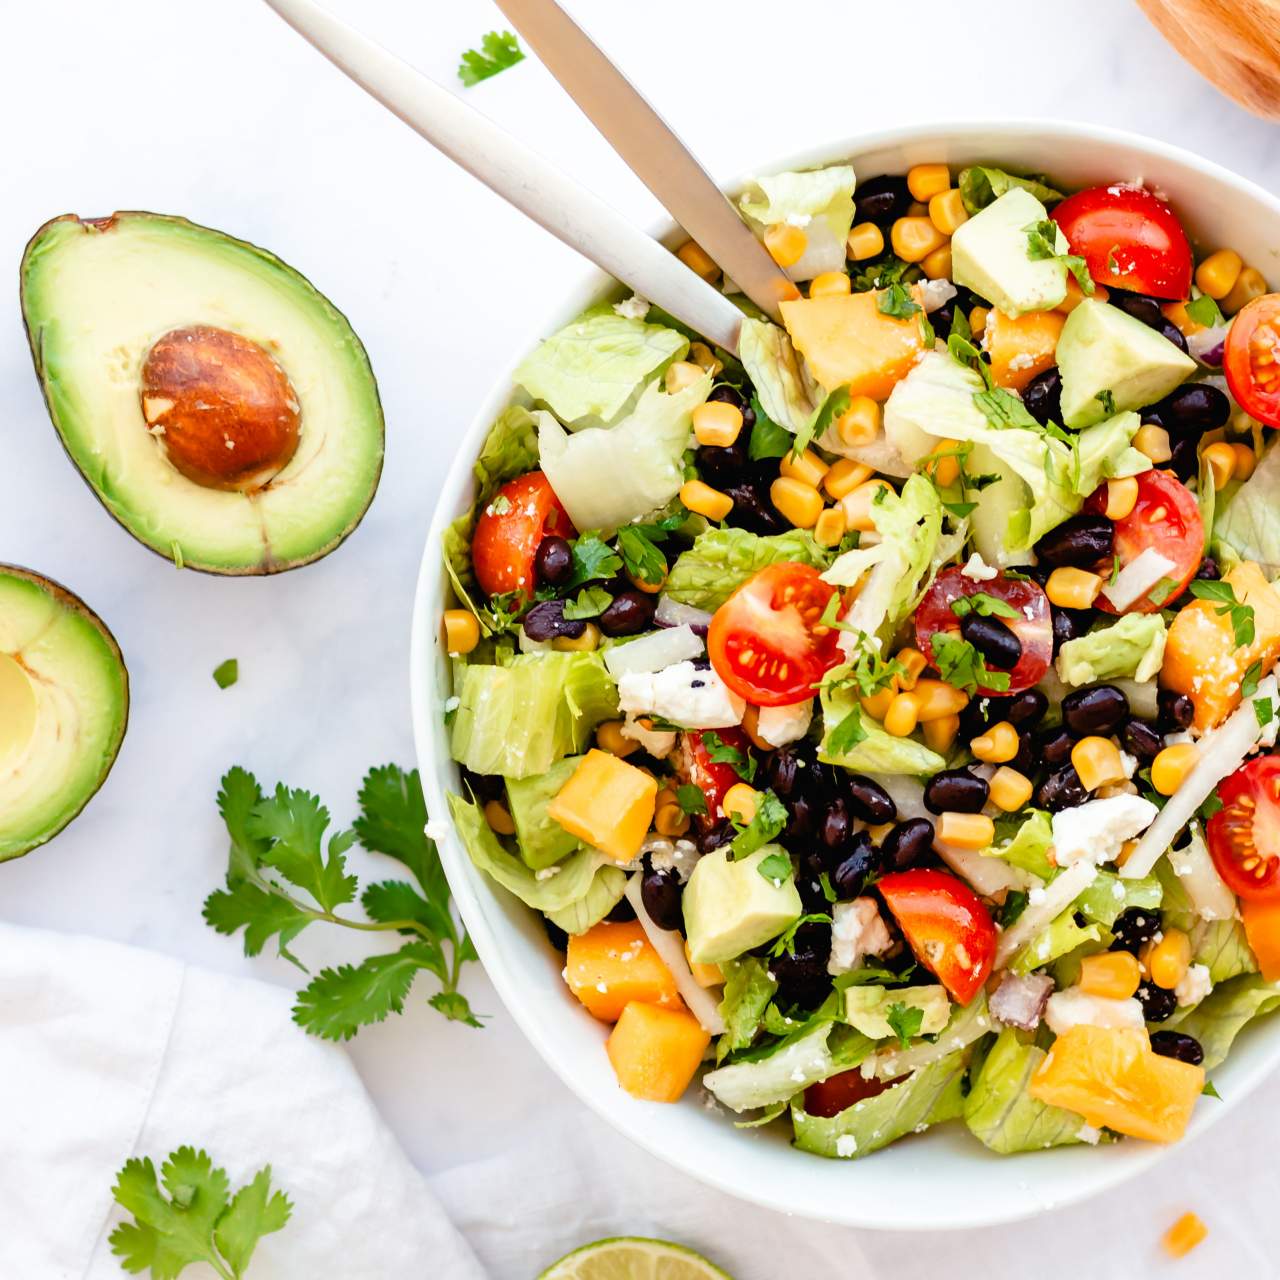 https://www.slenderkitchen.com/sites/default/files/styles/gsd-1x1/public/recipe_images/mexican-chopped-salad.jpg